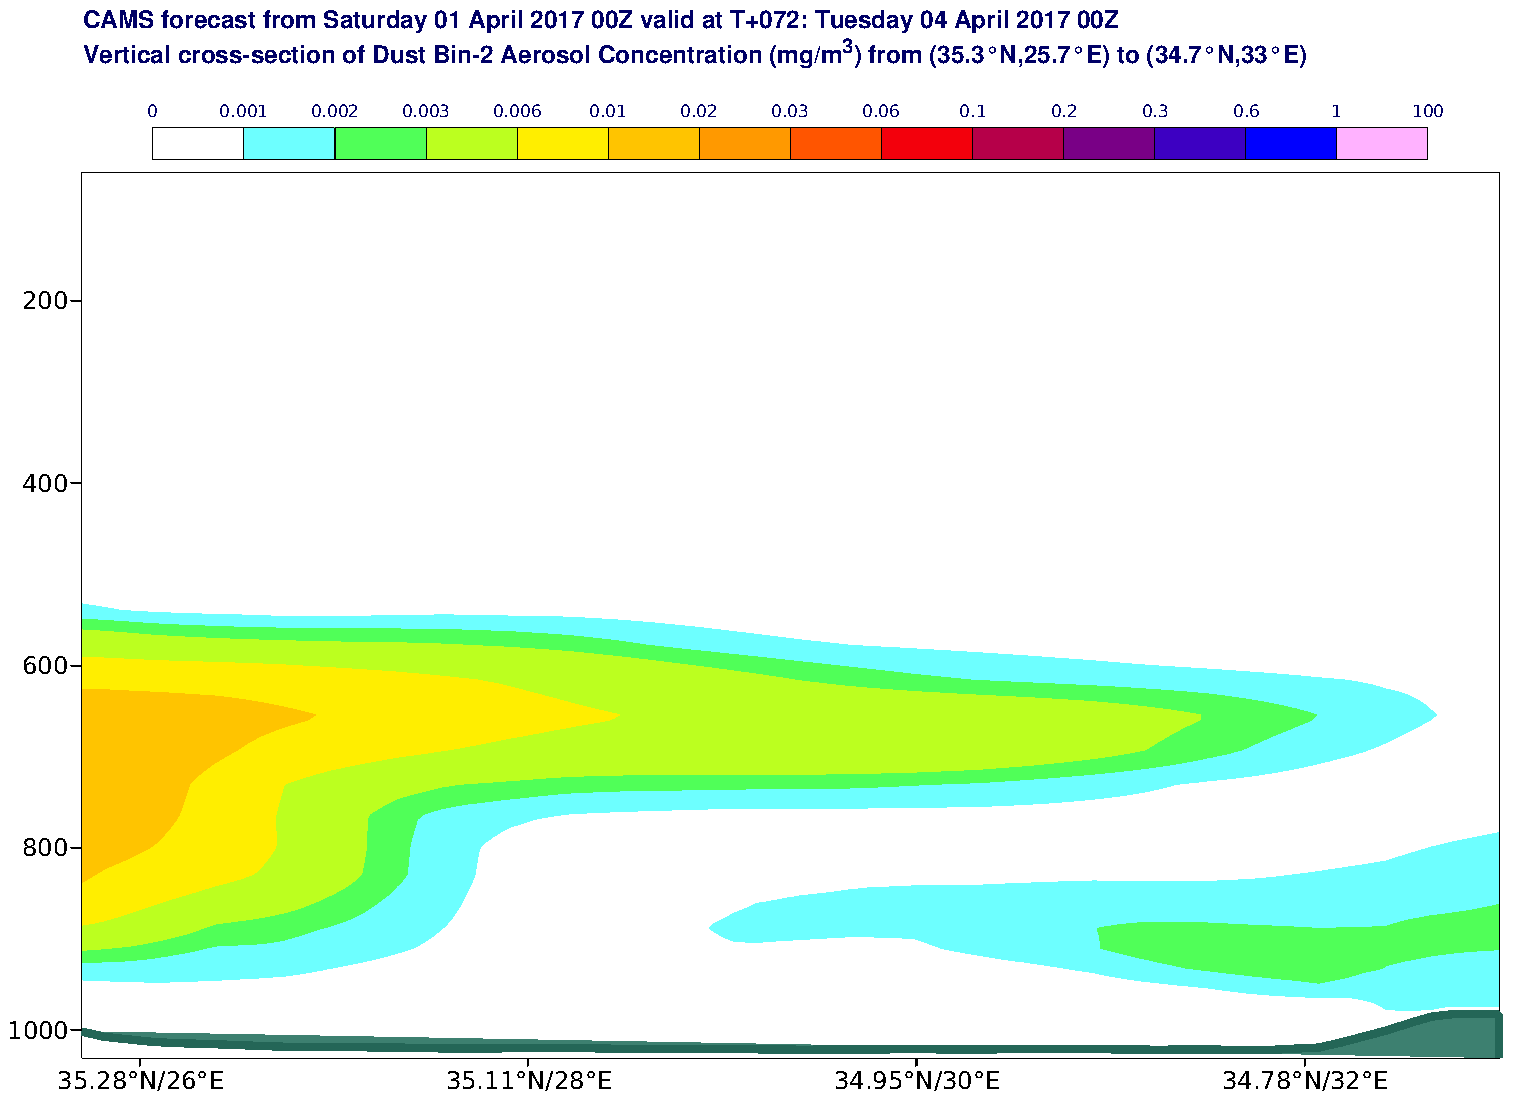 Vertical cross-section of Dust Bin-2 Aerosol Concentration (mg/m3) valid at T72 - 2017-04-04 00:00